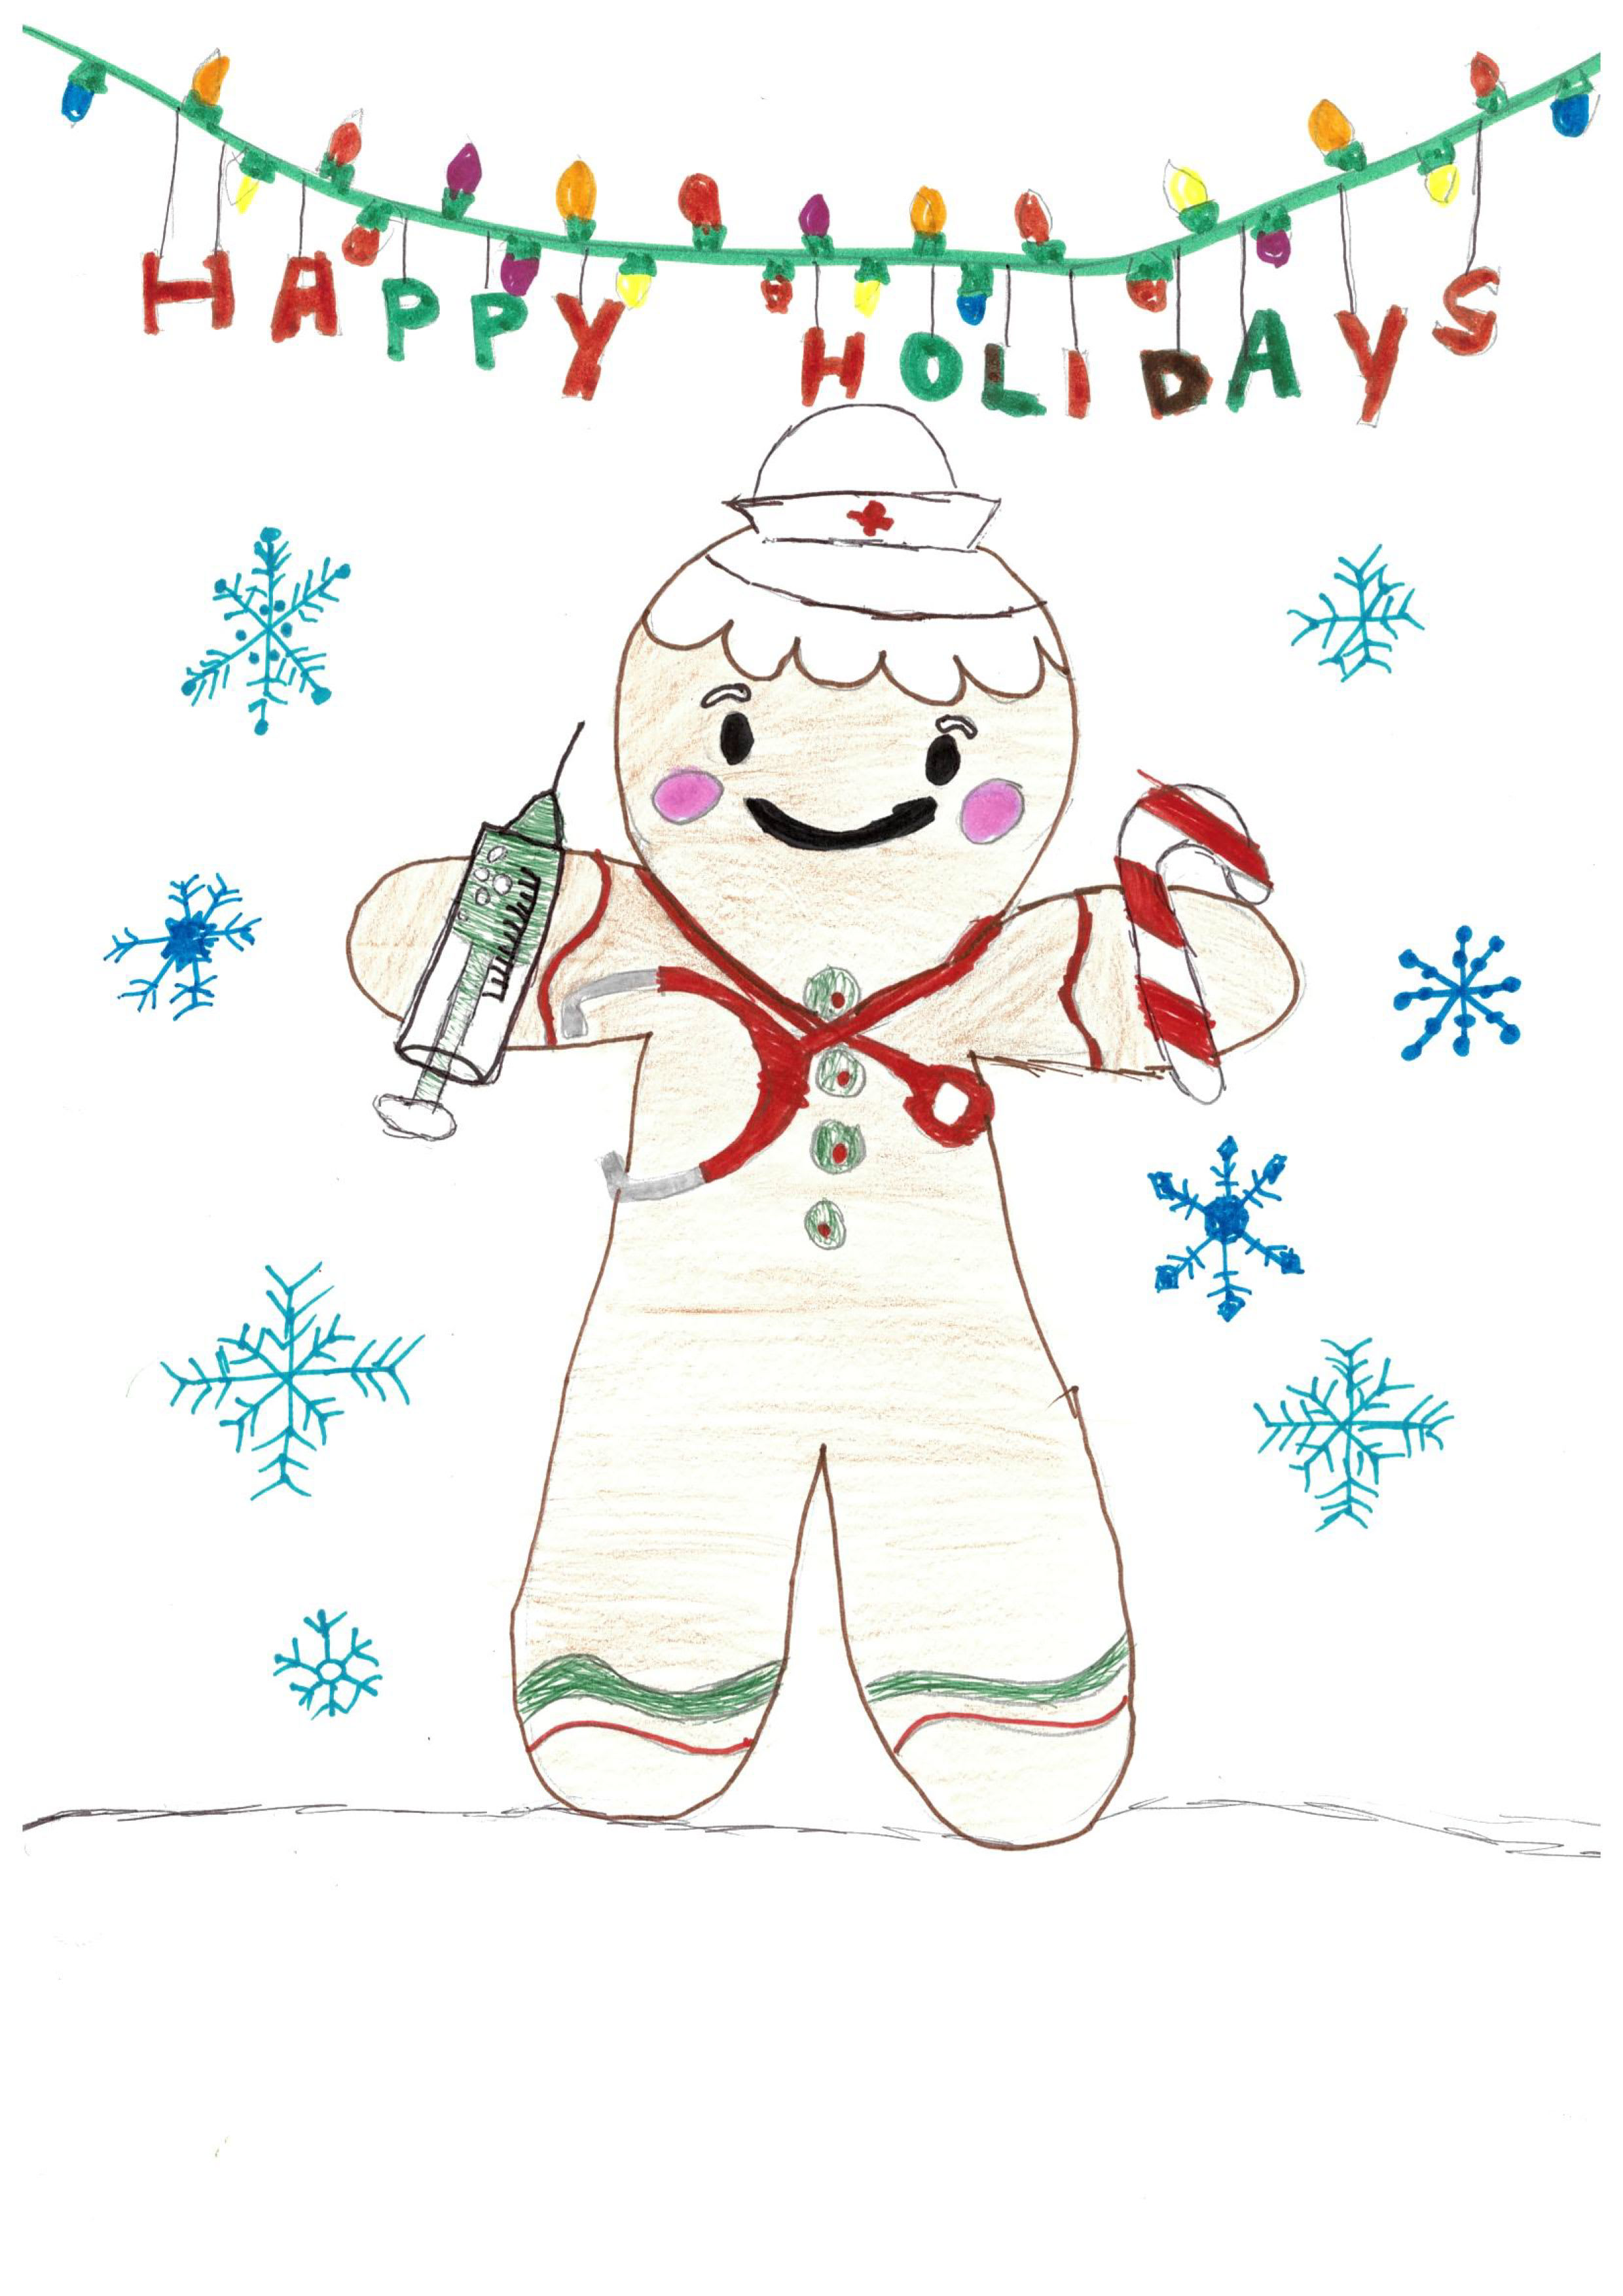 A holiday card featuring a gingerbread person as a healthcare worker